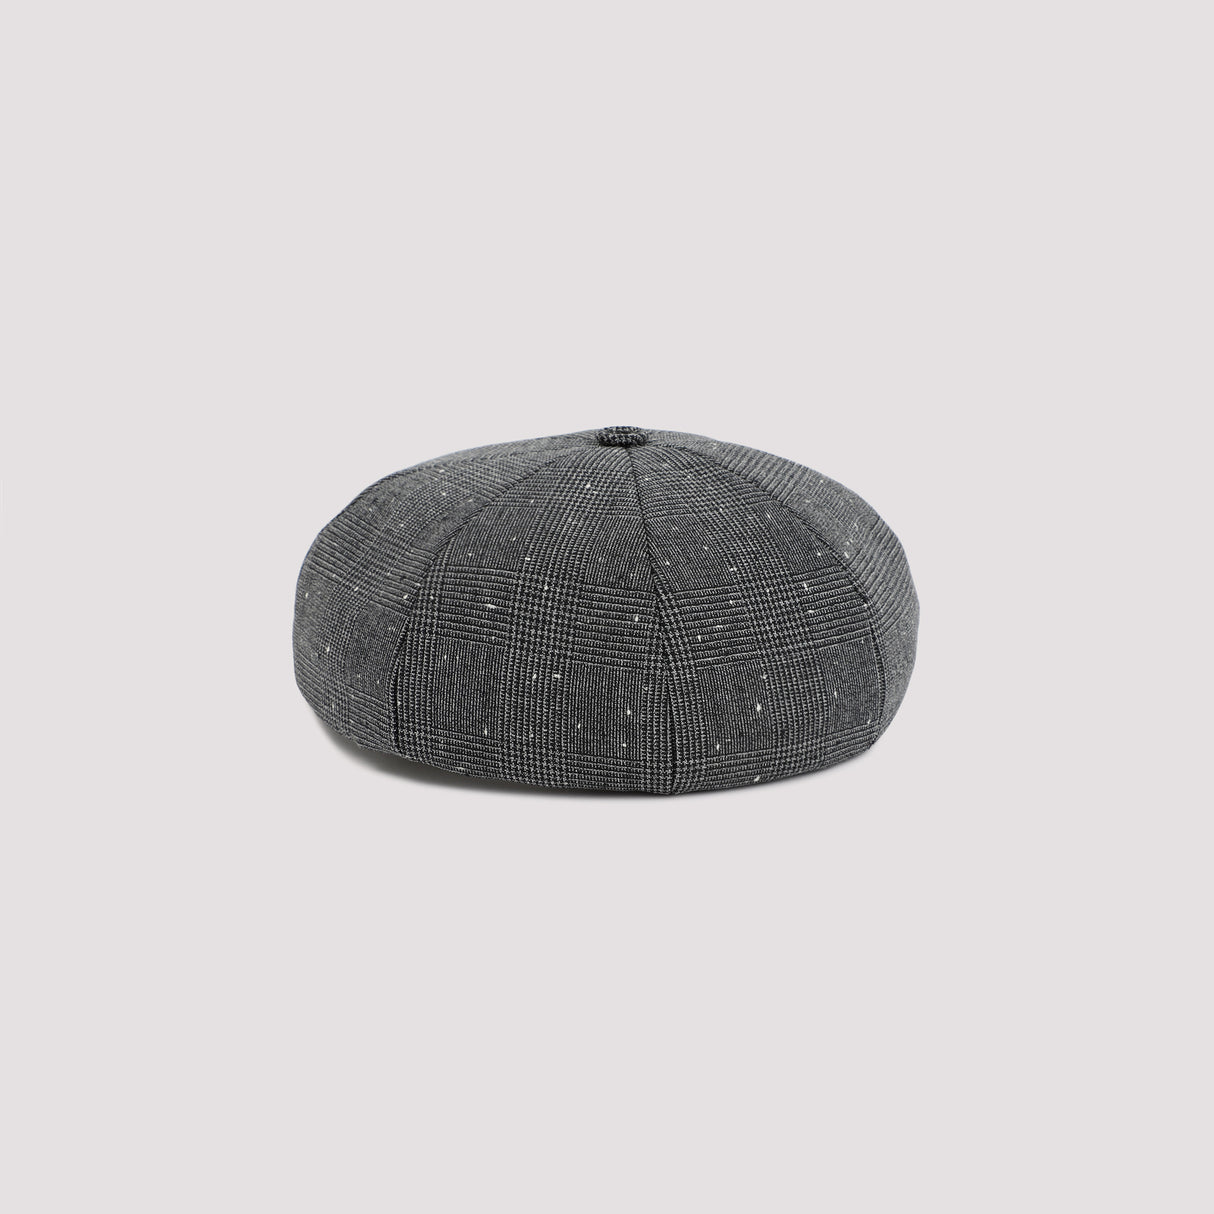 DIOR HOMME Men's Grey Wool-Blend Canvas Cap with Prince of Wales Motif